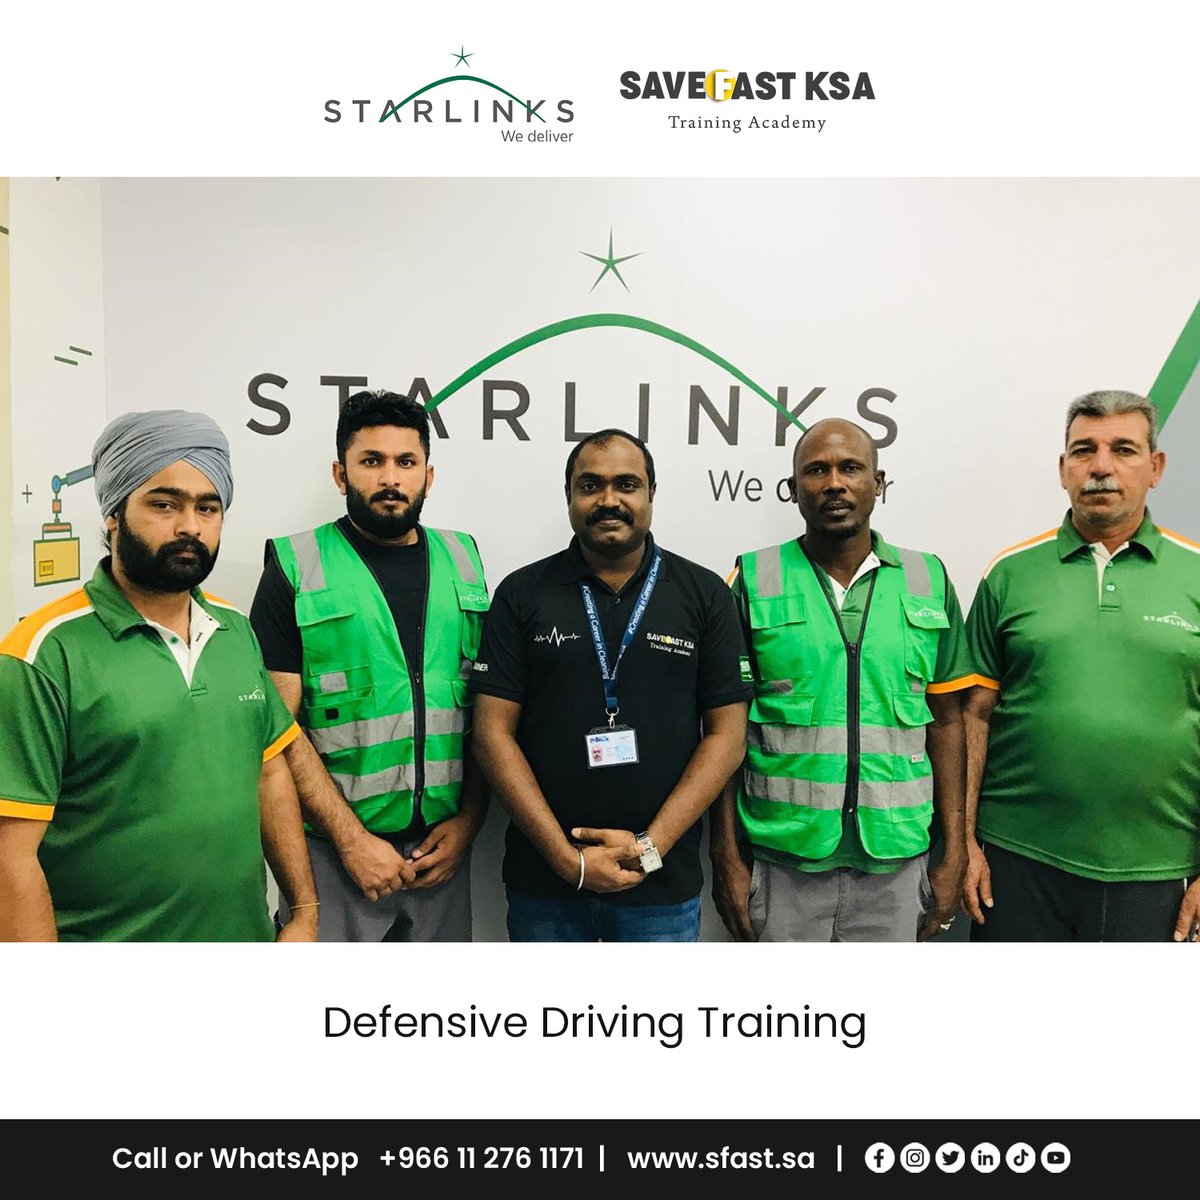 We're thrilled to announce the successful completion of our Heavy Motor Vehicle Defensive Driving training for @Starlinks Logistics KSA team, prioritizing safer driving practices and strict adherence to road regulations. Let's drive safely together!

#StarLinks  #DefensiveDriving